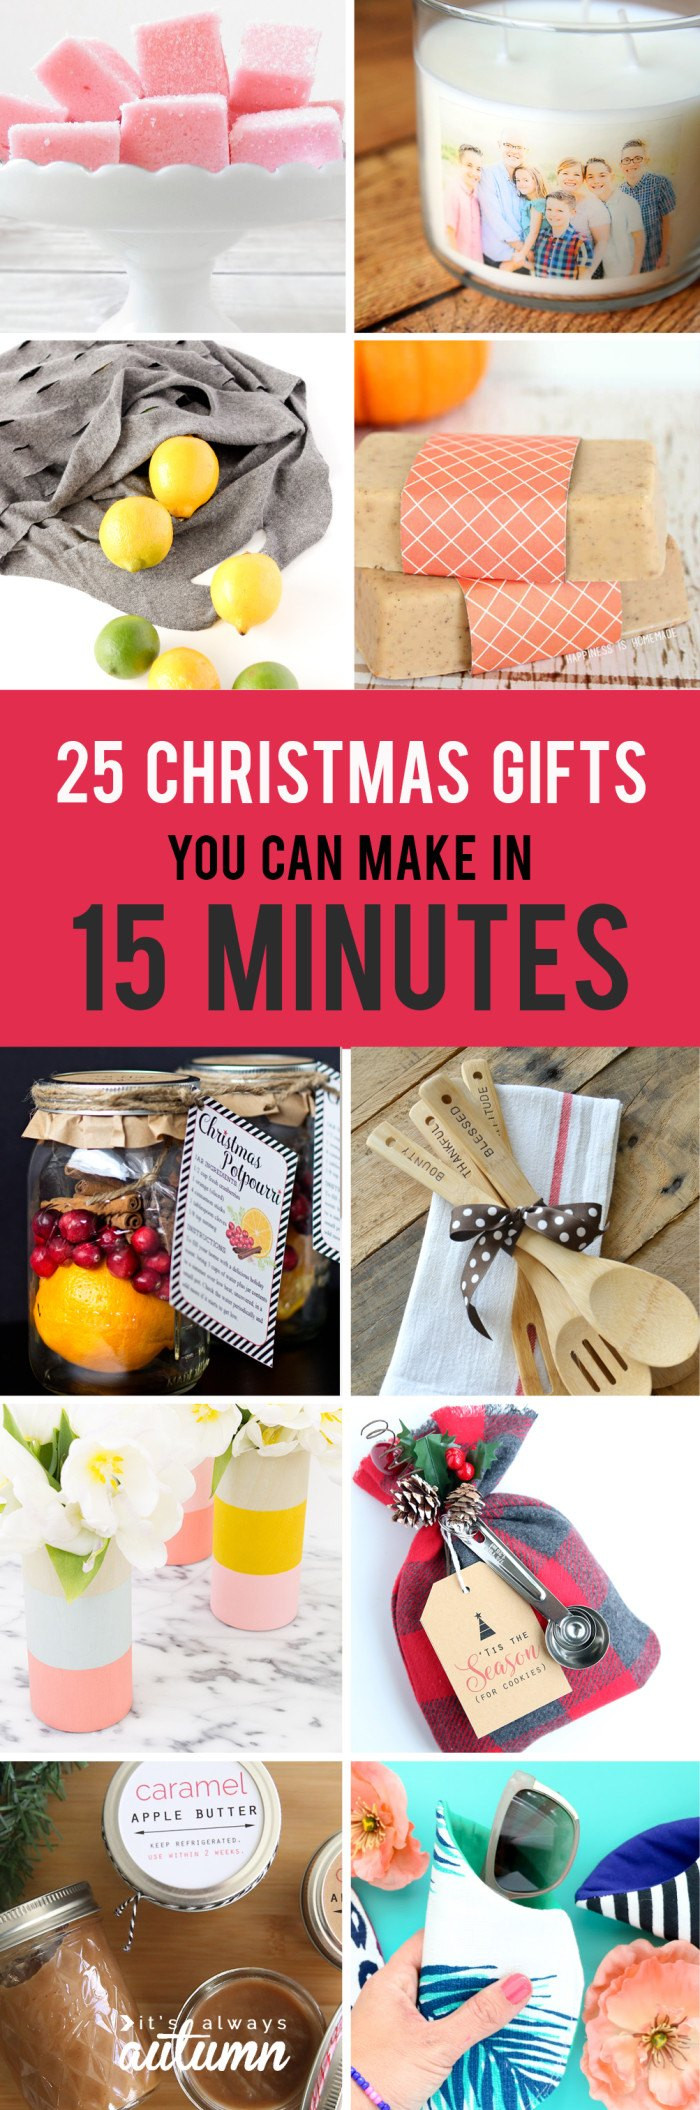 Best DIY Christmas Gifts
 25 Easy Christmas Gifts That You Can Make in 15 Minutes